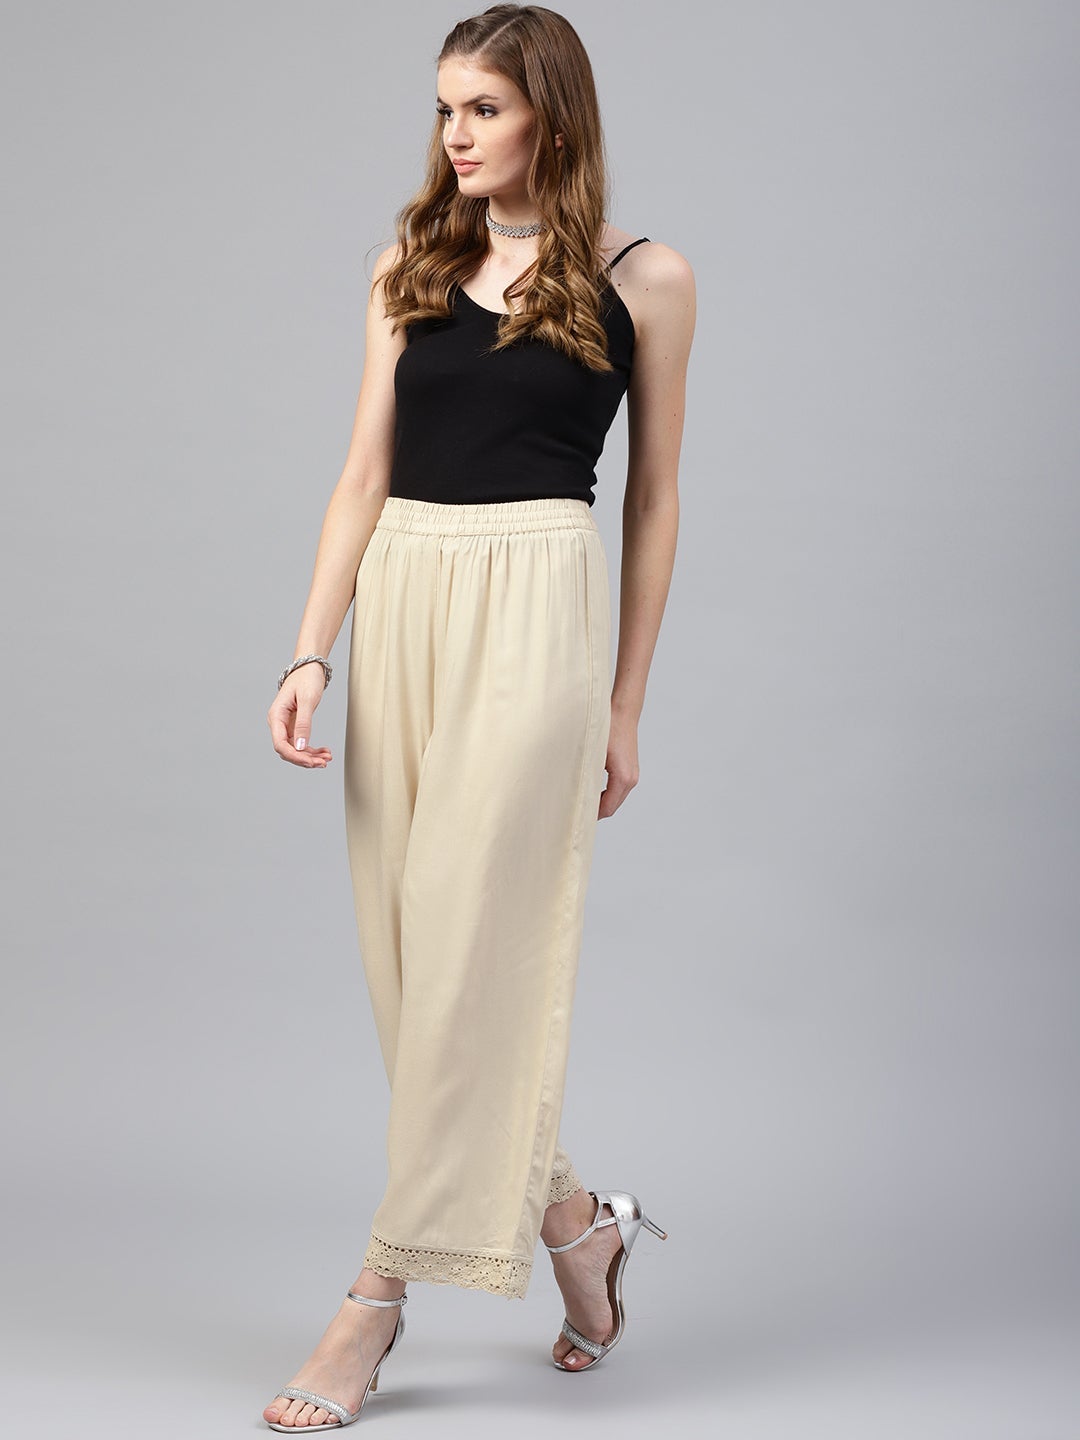 Juniper Beige Solid Rayon Wide Leg Women Palazzo With One Pocket